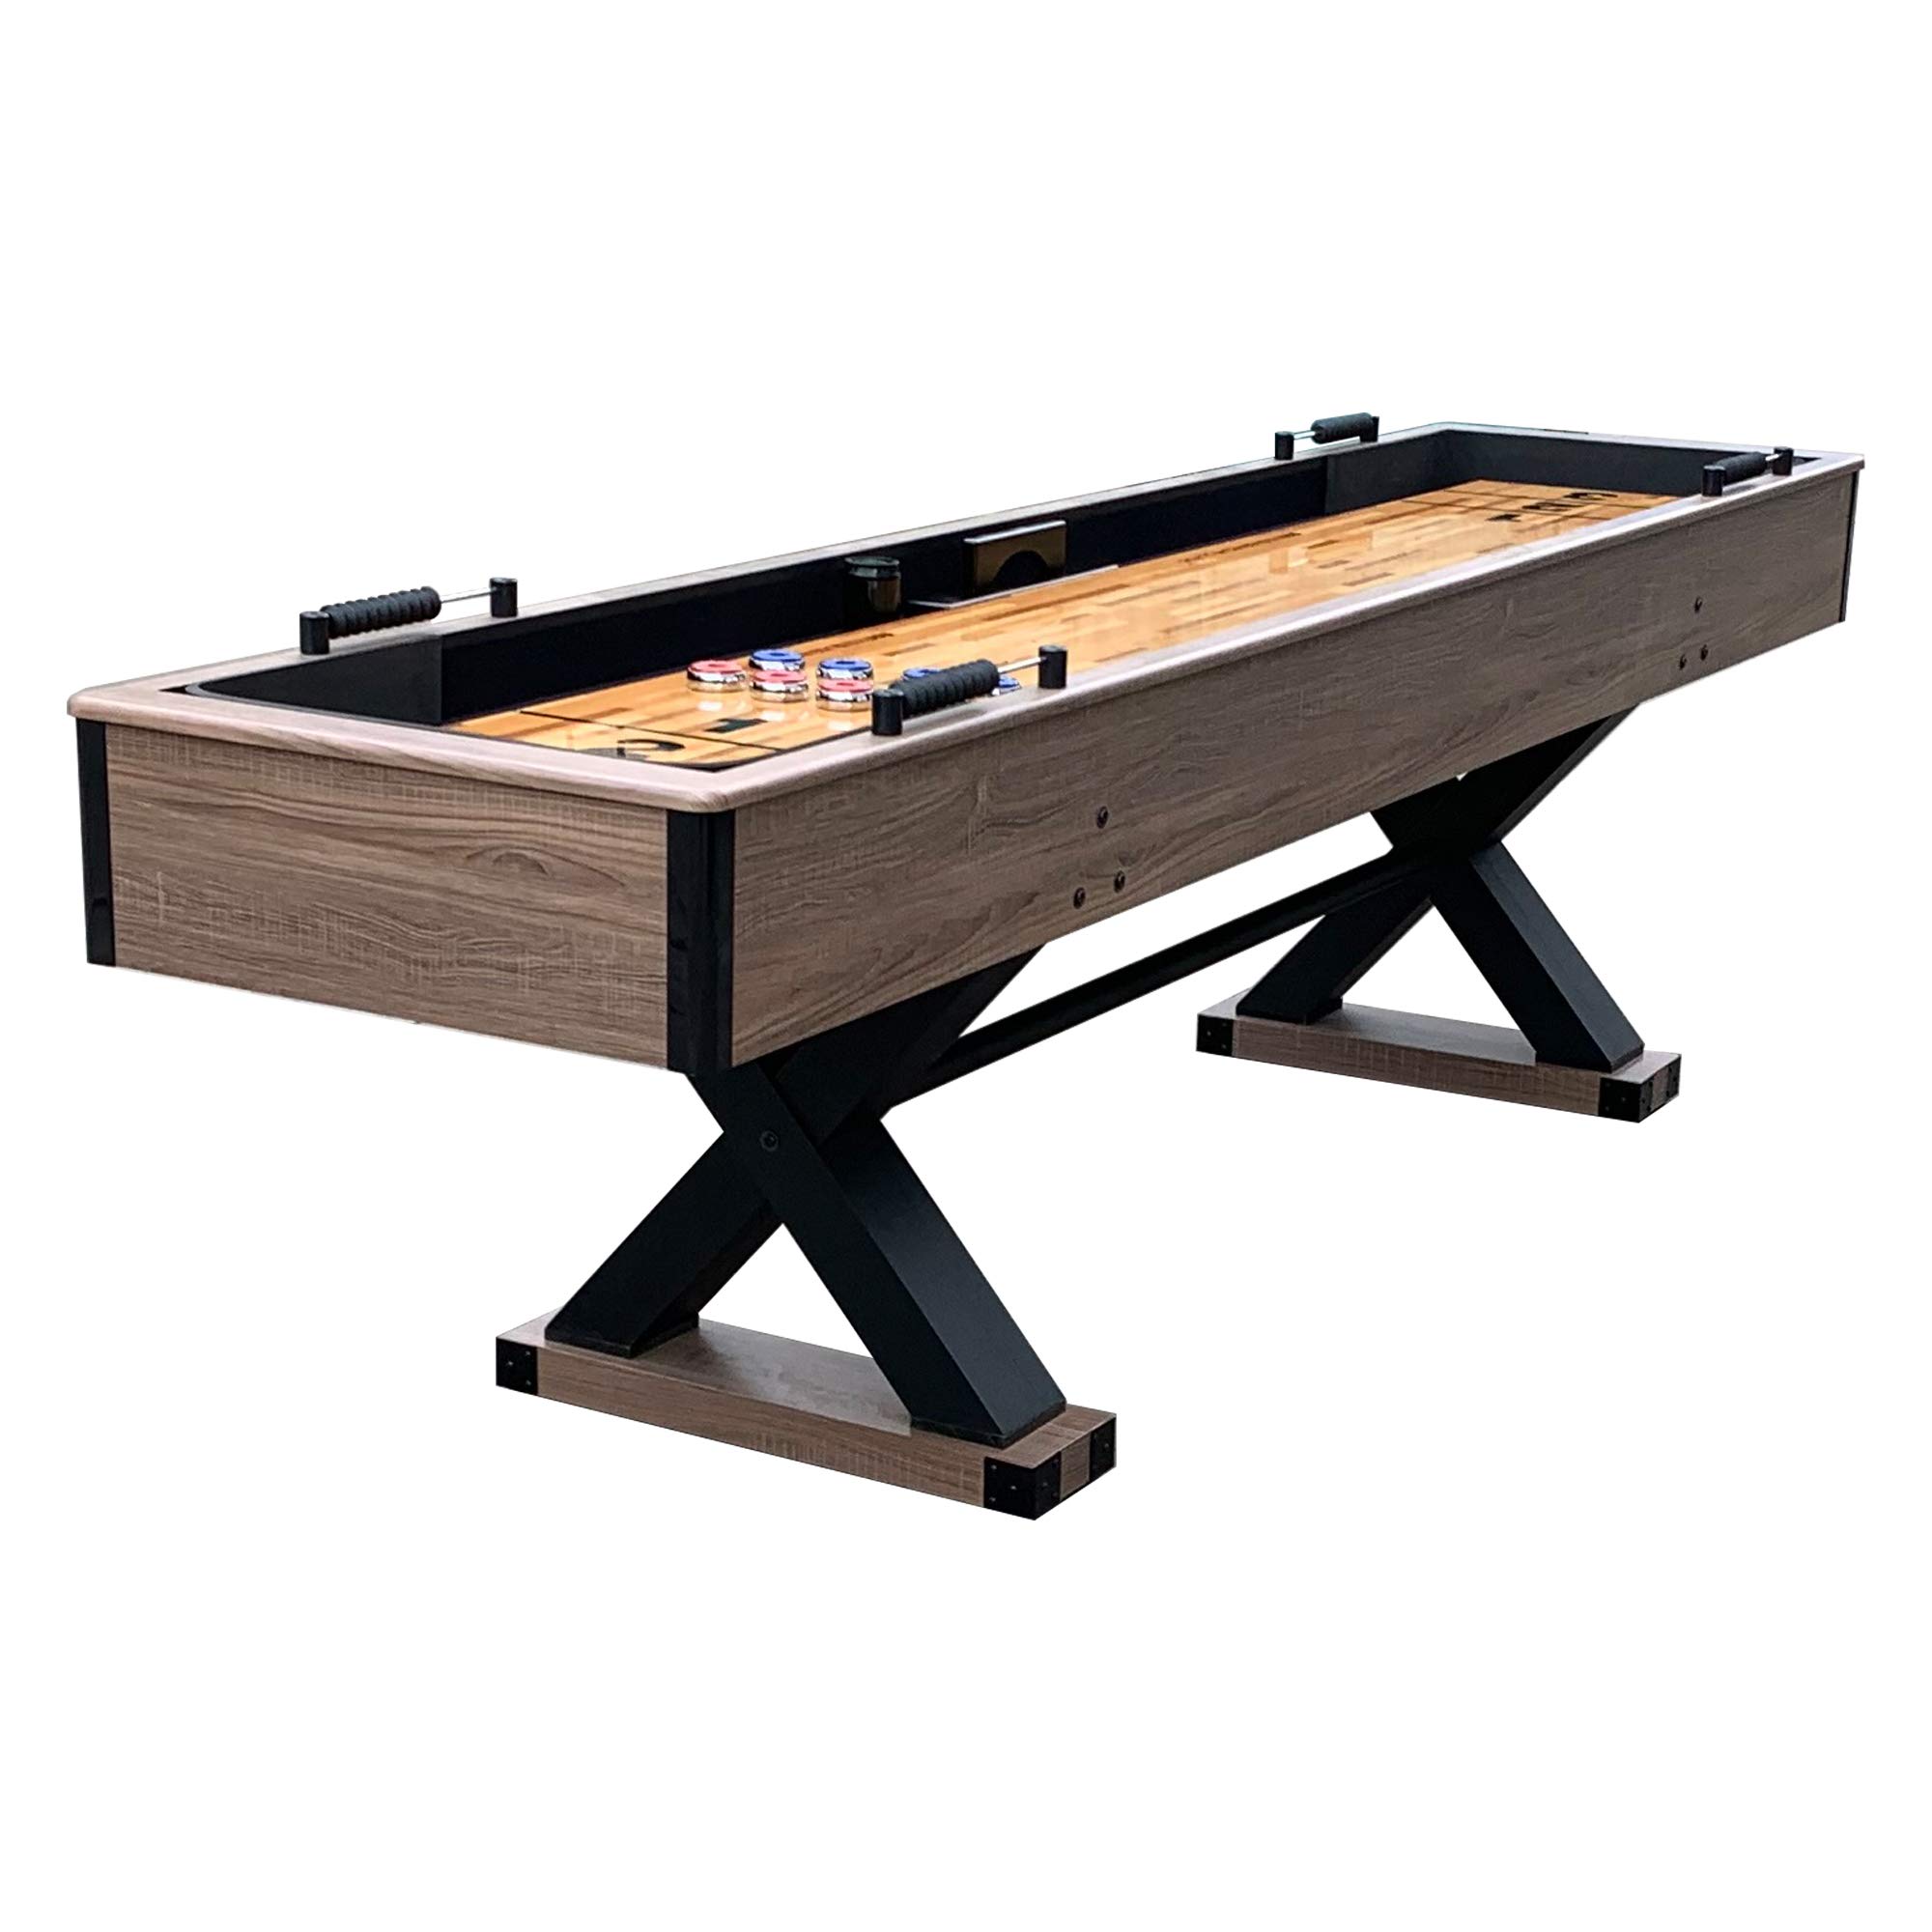 Hathaway&#153; Hathaway Excalibur 9-Ft Shuffleboard Table for great for Family Recreation game Rooms,includes 8 Pucks, Table Brush and Wax,Blac